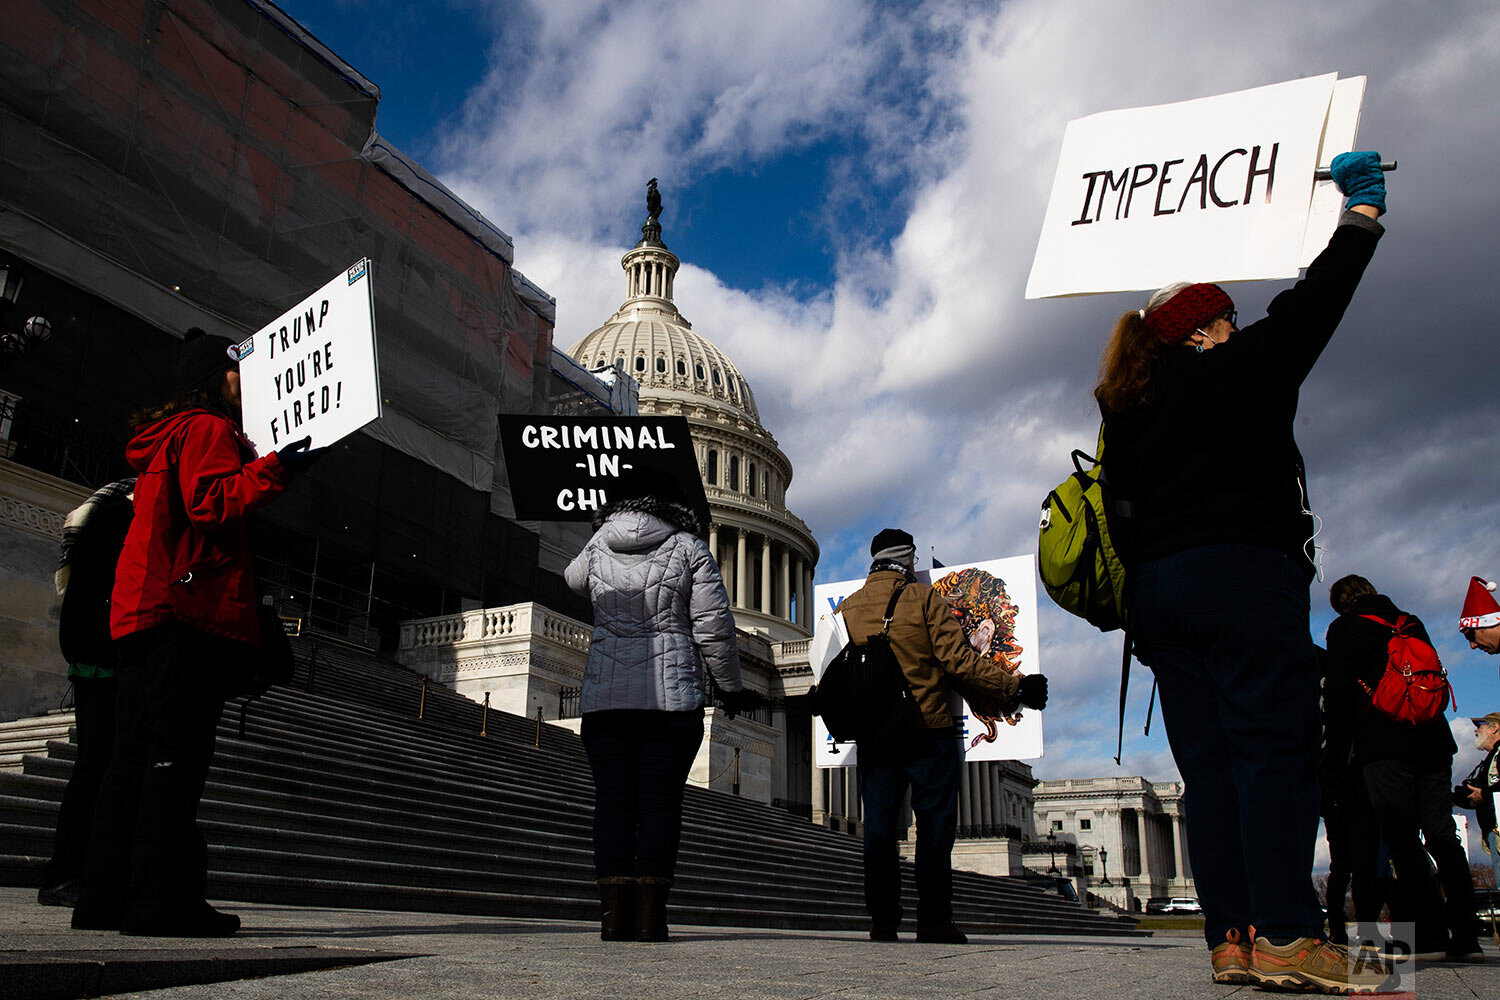  Protesters demonstrate as the House of Representatives debates on the articles of impeachment against President Donald Trump at the U.S. Capitol building, Wednesday, Dec. 18, 2019, on Capitol Hill in Washington. (AP Photo/Matt Rourke) 